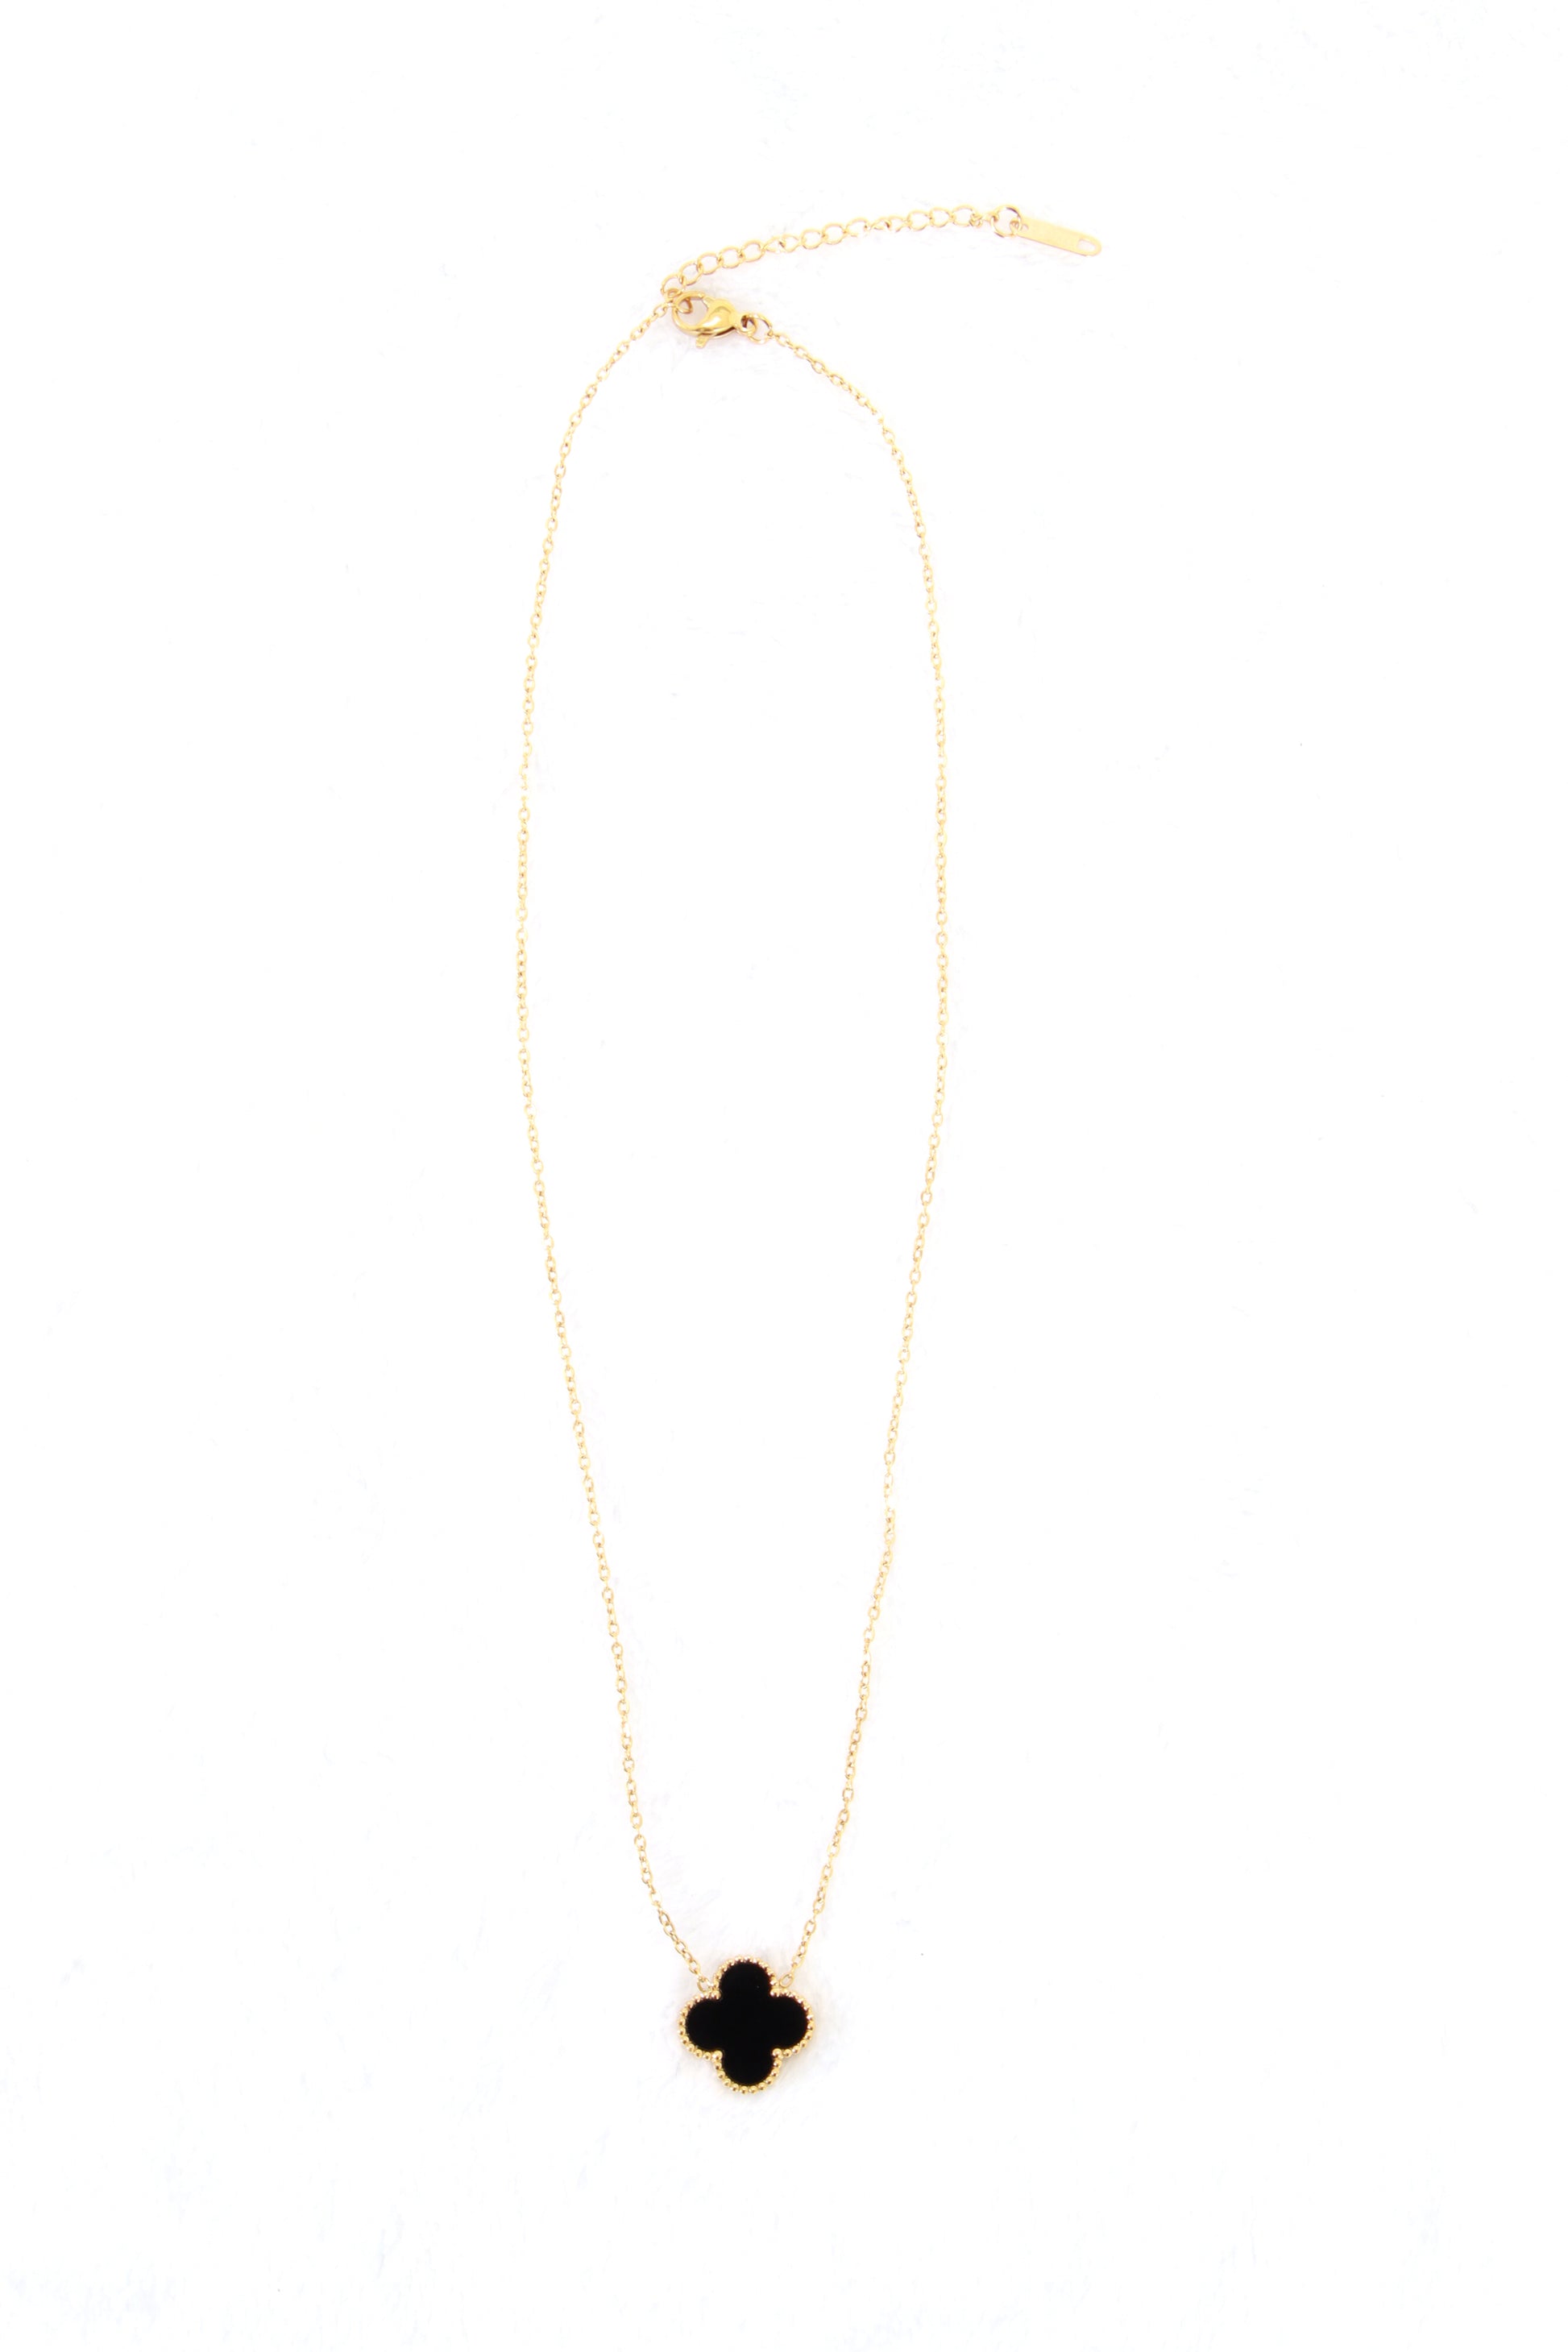 Pearly White Clovers Necklace Gold-colored Chain Stainless 